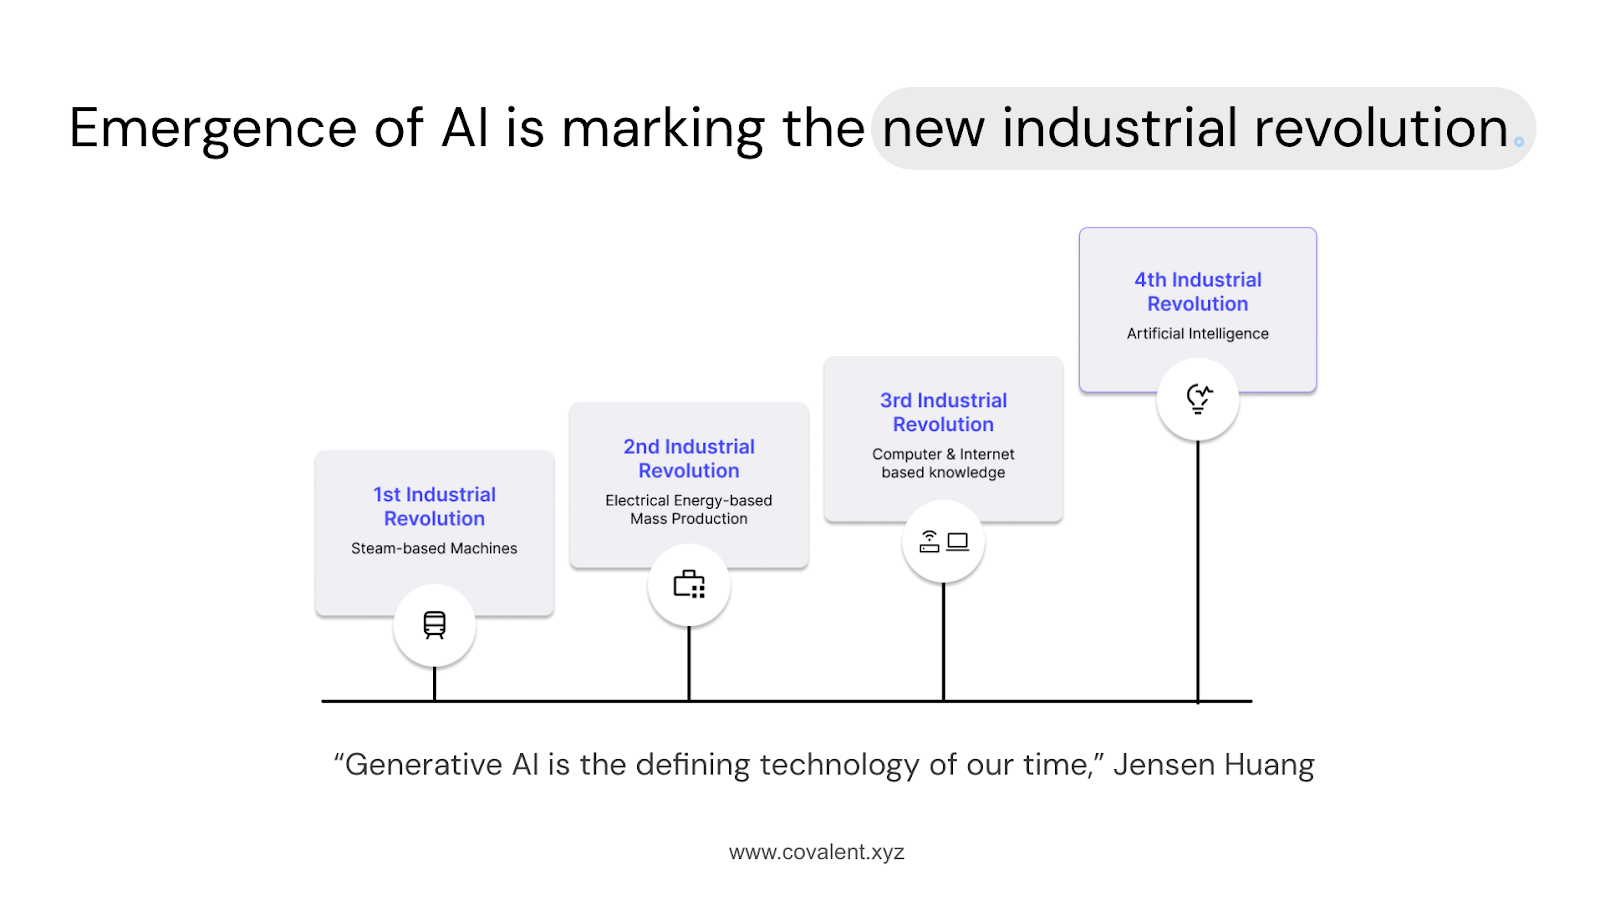 Infographic illustrating the evolution of industrial revolutions, culminating in the emergence of AI as the defining technology of our time. The timeline includes four stages: 1st Industrial Revolution – steam-based machines; 2nd Industrial Revolution – electrical energy-based mass production; 3rd Industrial Revolution: – computer and internet-based knowledge; 4th Industrial Revolution – artificial intelligence. At the bottom, a quote from Jensen Huang states, "Generative AI is the defining technology of our time." 